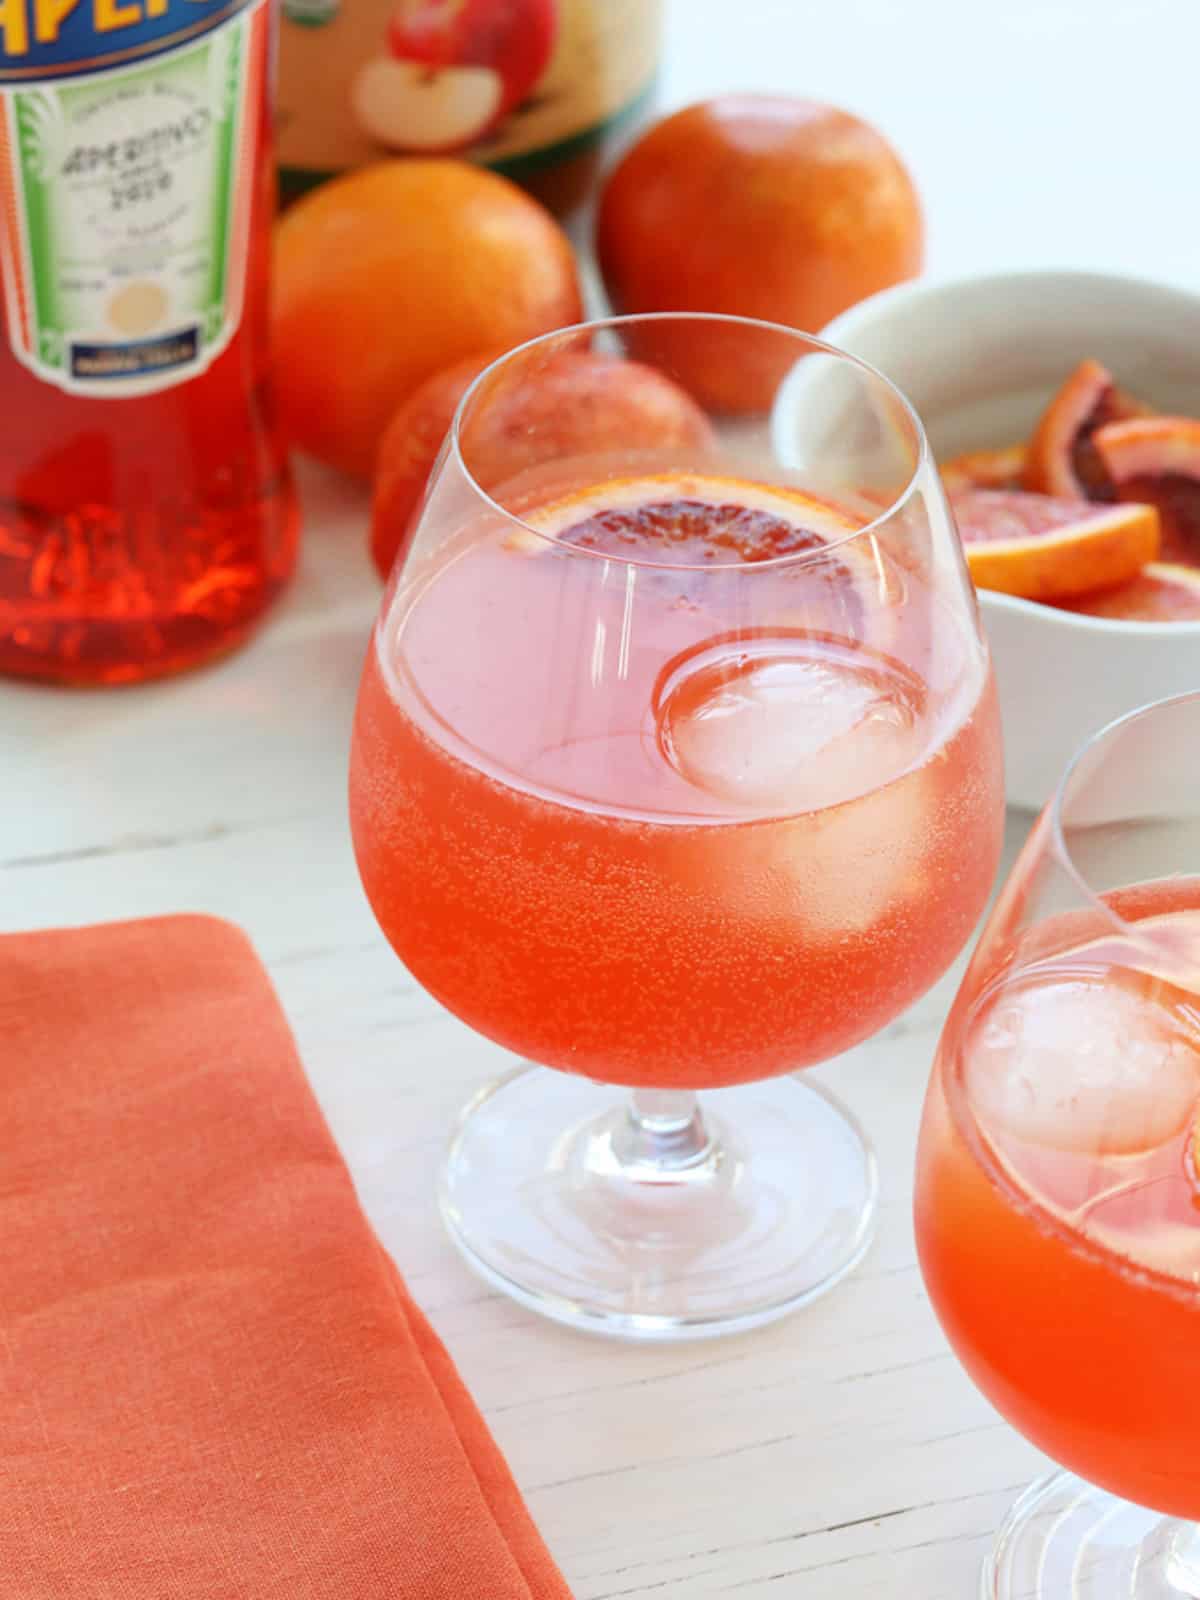 An icy cold glass of Aperol Spritz cocktail with round ice and blood orange garnish.